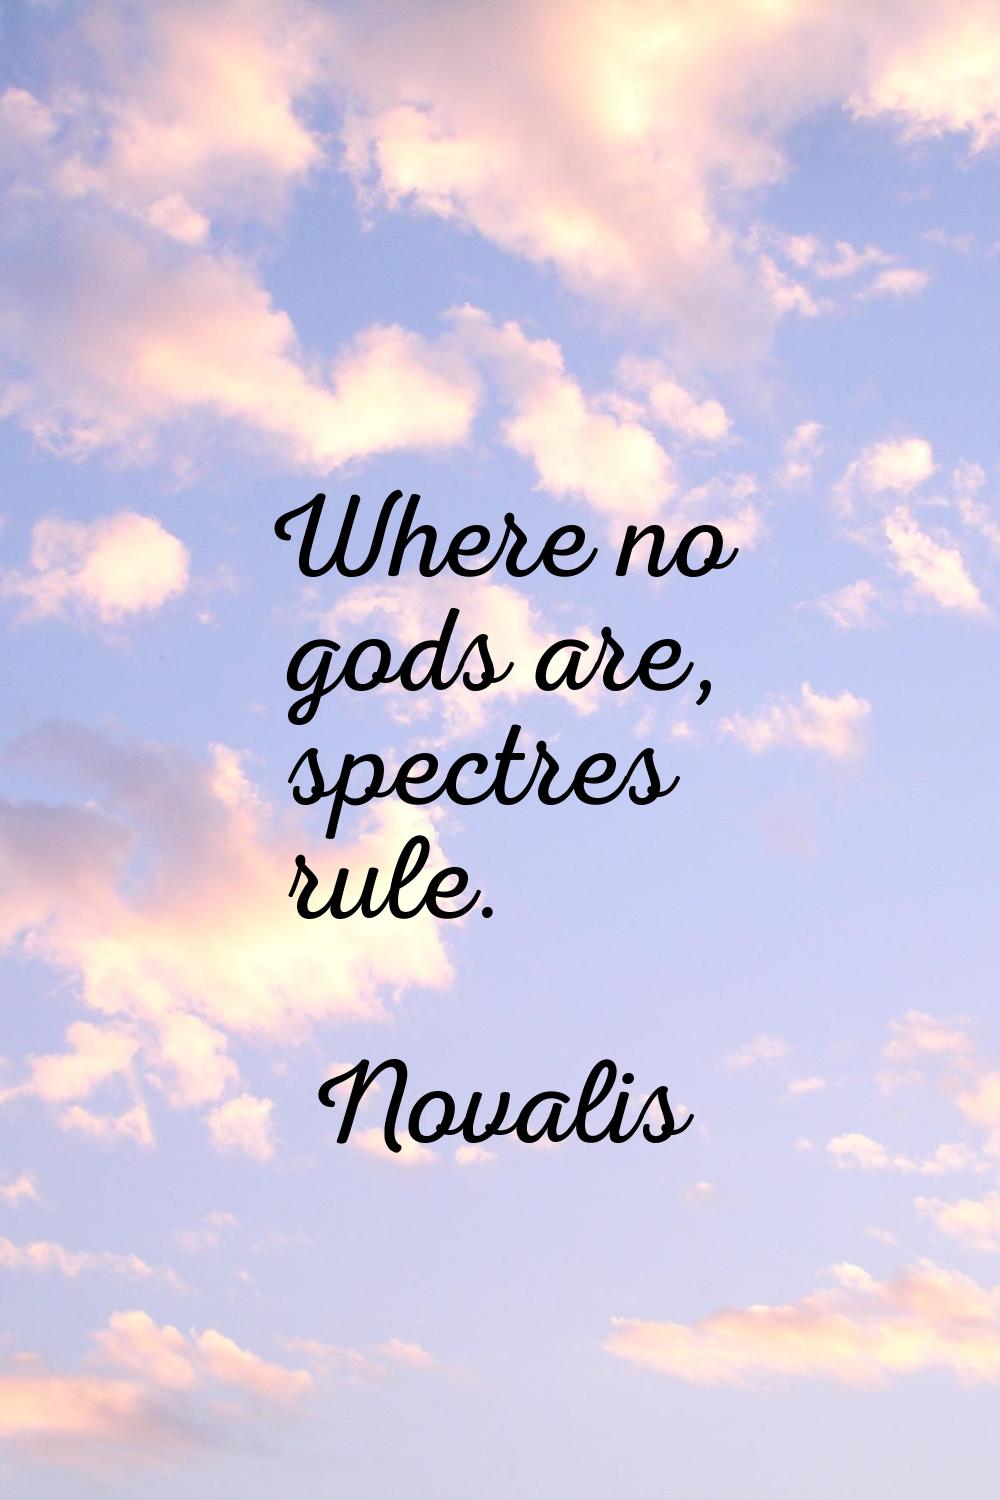 Where no gods are, spectres rule.